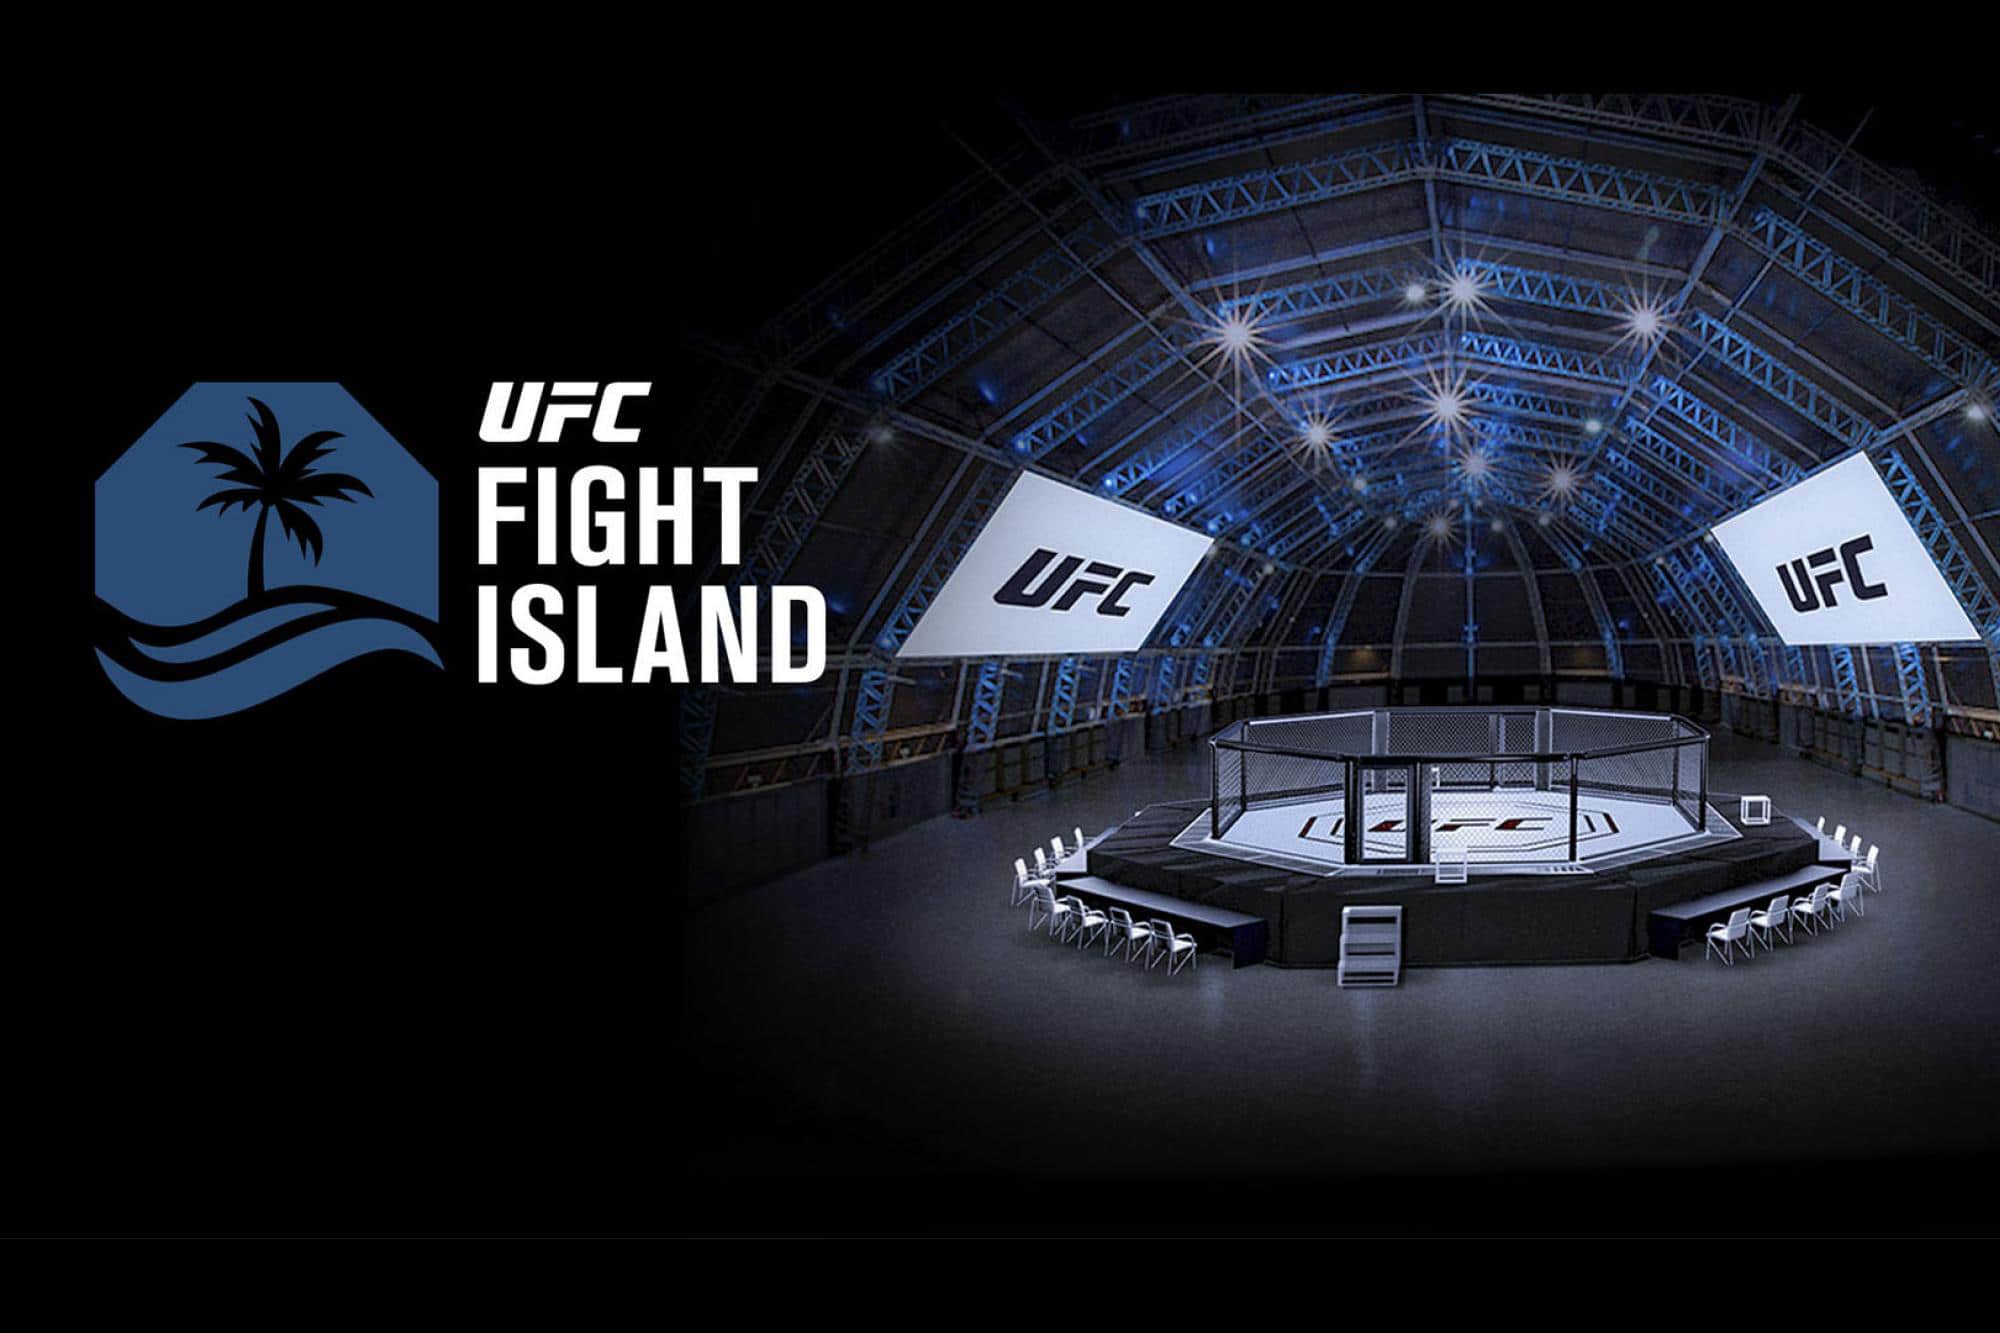 IMMAF certified judges in UFC debut at Fight Island